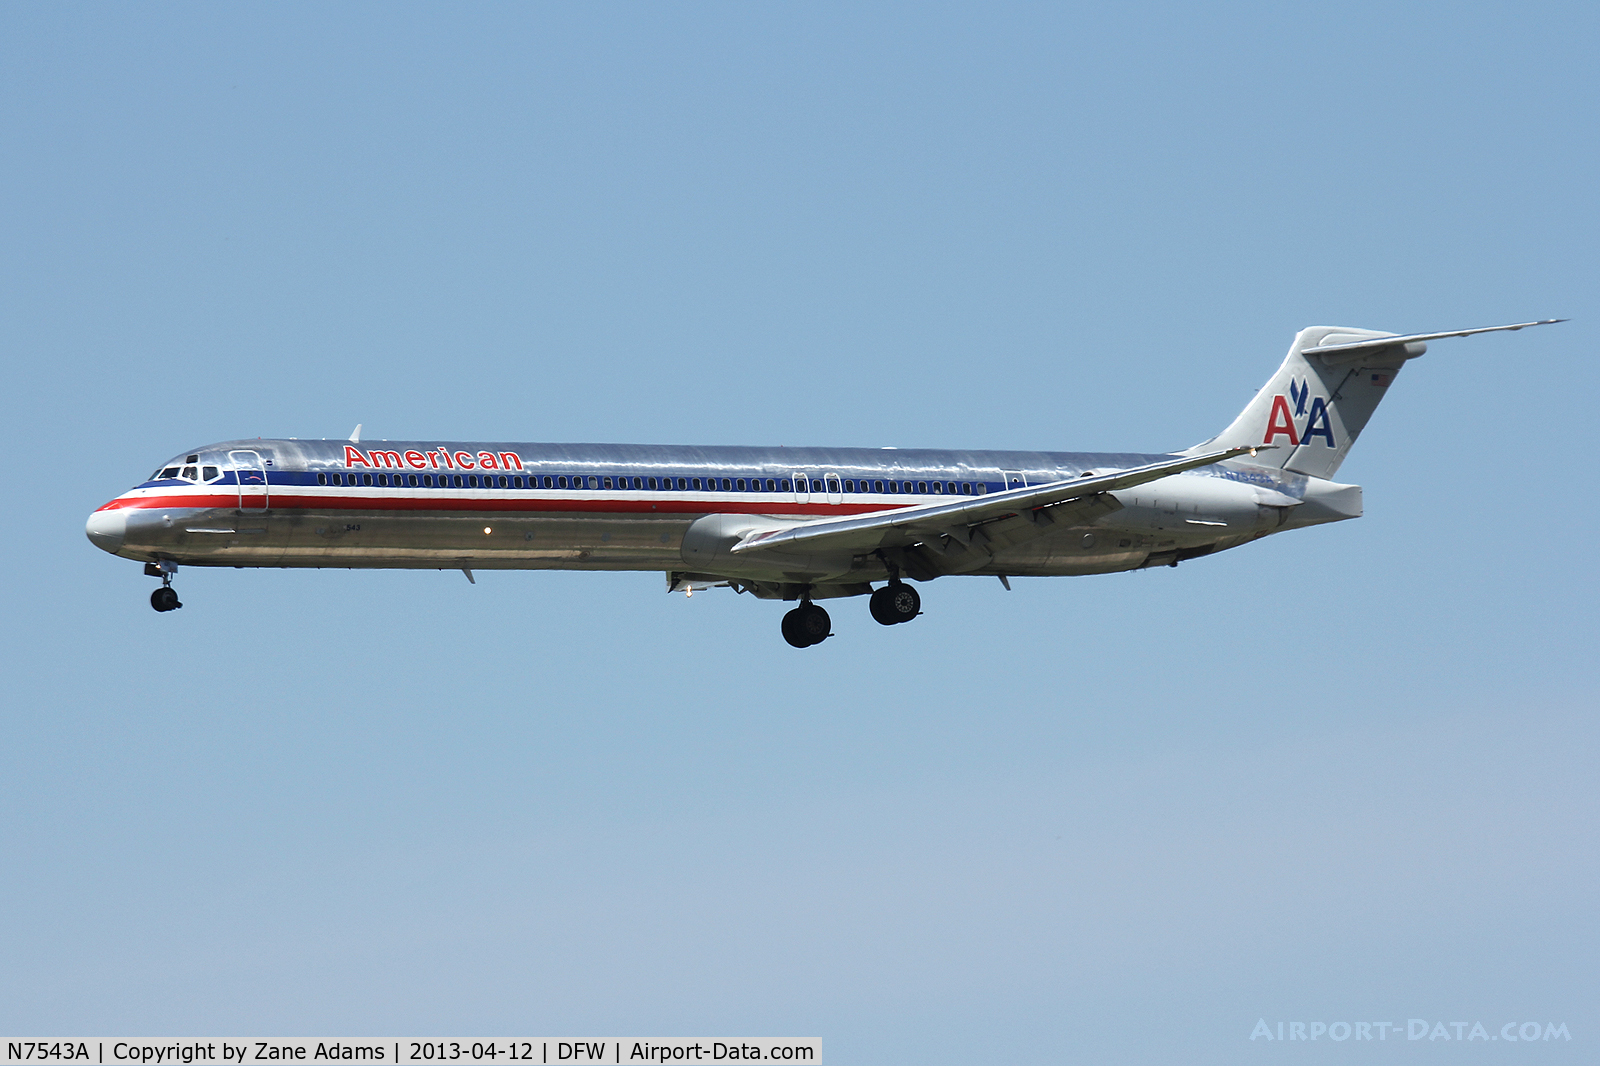 N7543A, 1990 McDonnell Douglas MD-82 (DC-9-82) C/N 53025, American Airlines landing at DFW Airport